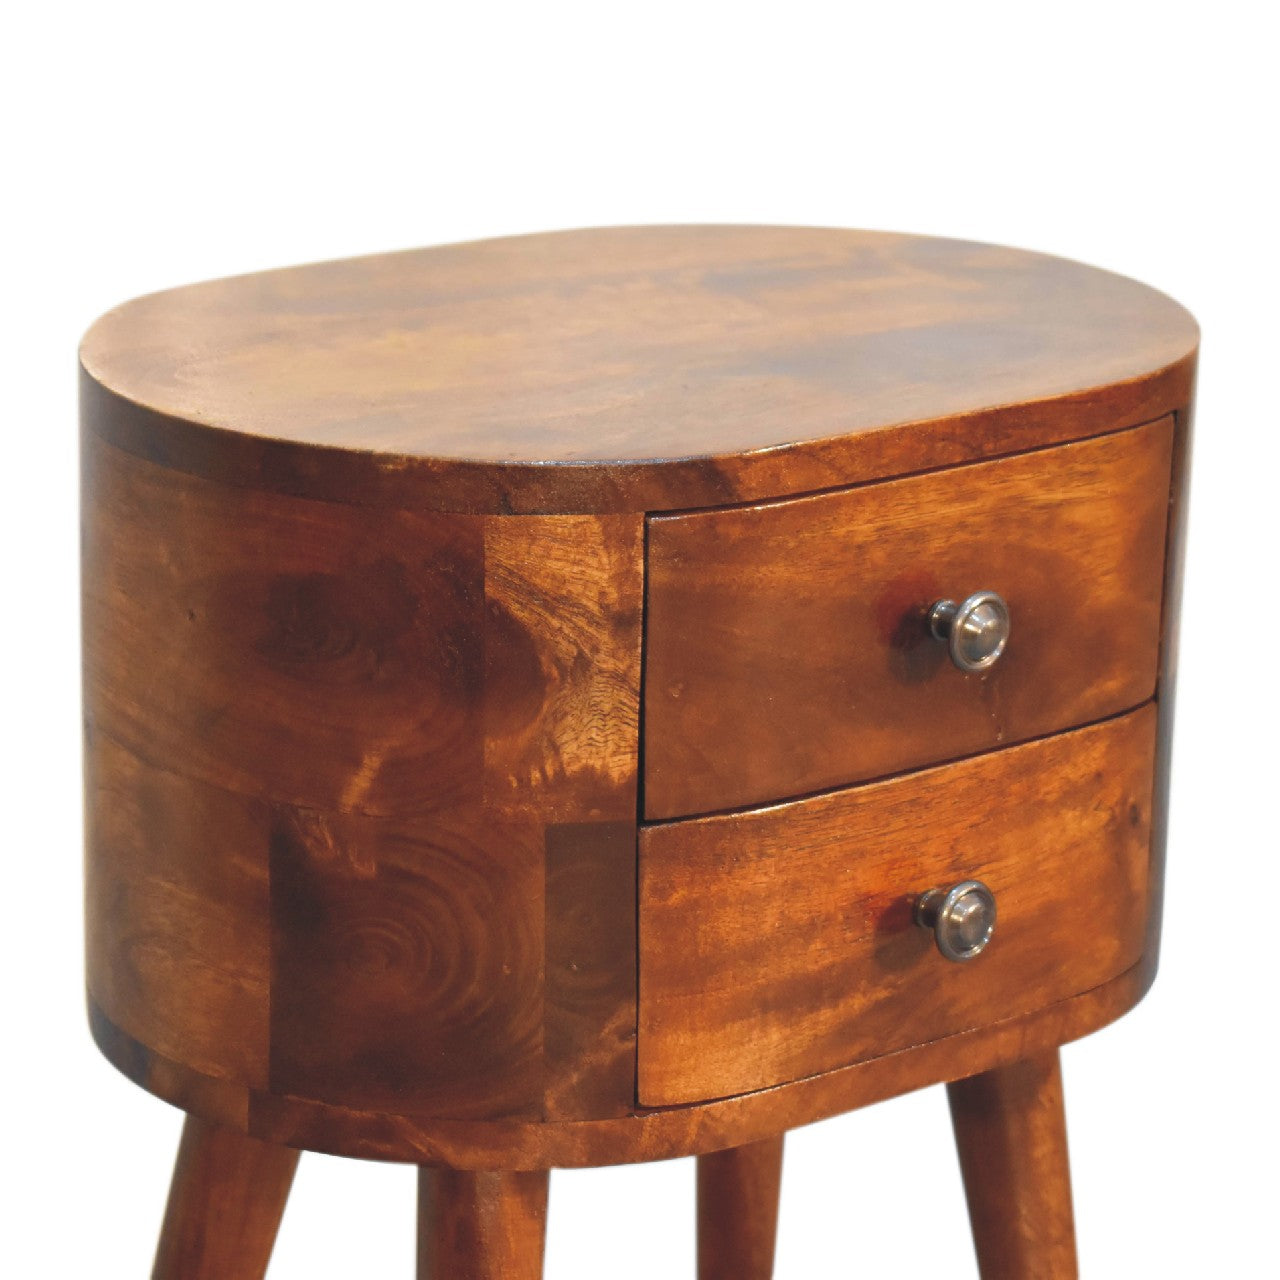 Mini Chestnut Rounded Bedside Table 2 Drawer Chest - CasaFenix